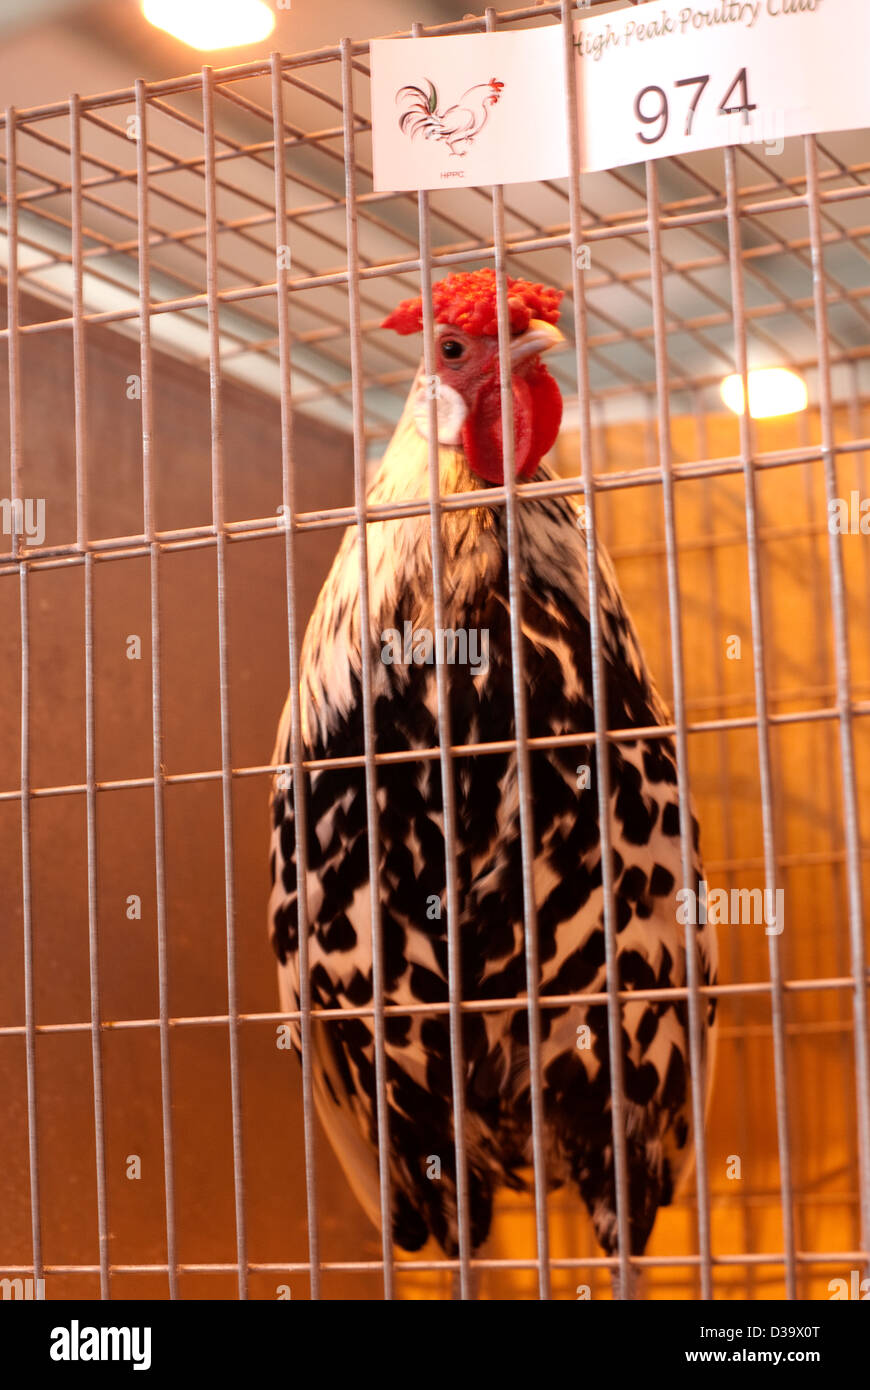 A Hamburg chicken looking out of his cage at a poultry show Stock Photo